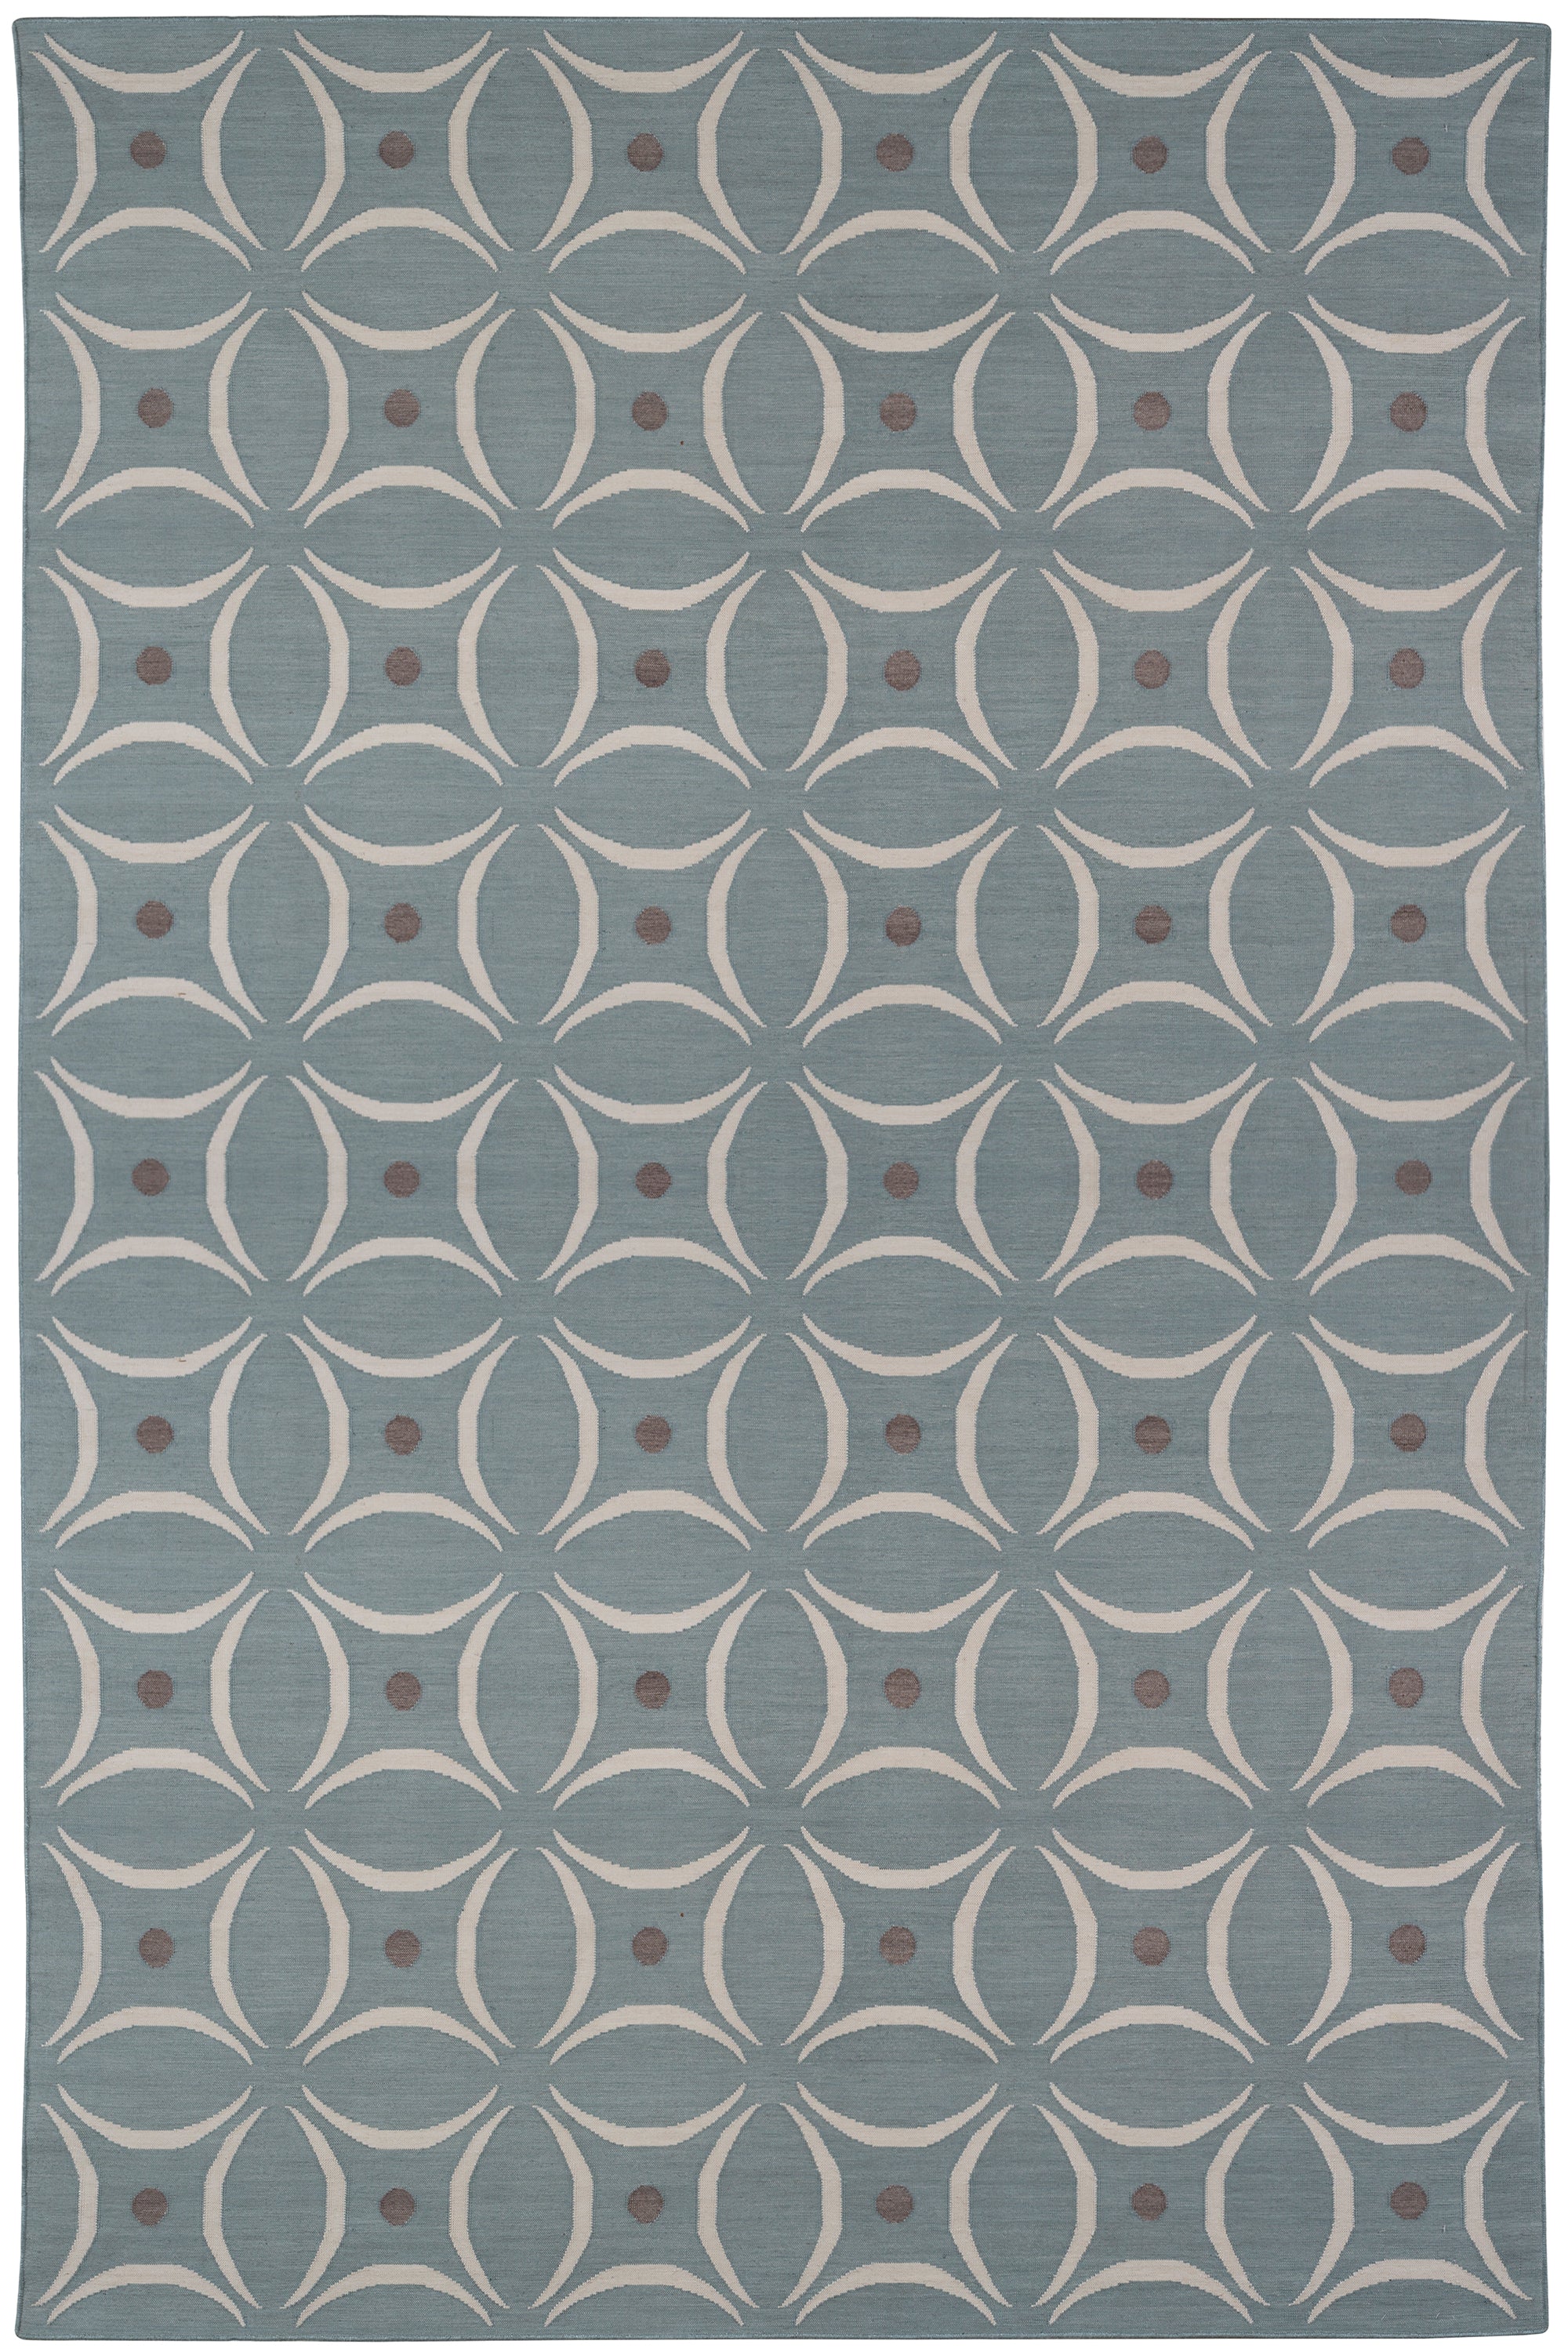 Full size Boe rug in Argento, featuring a pattern of white curved segments with taupe circles on a blue field. 